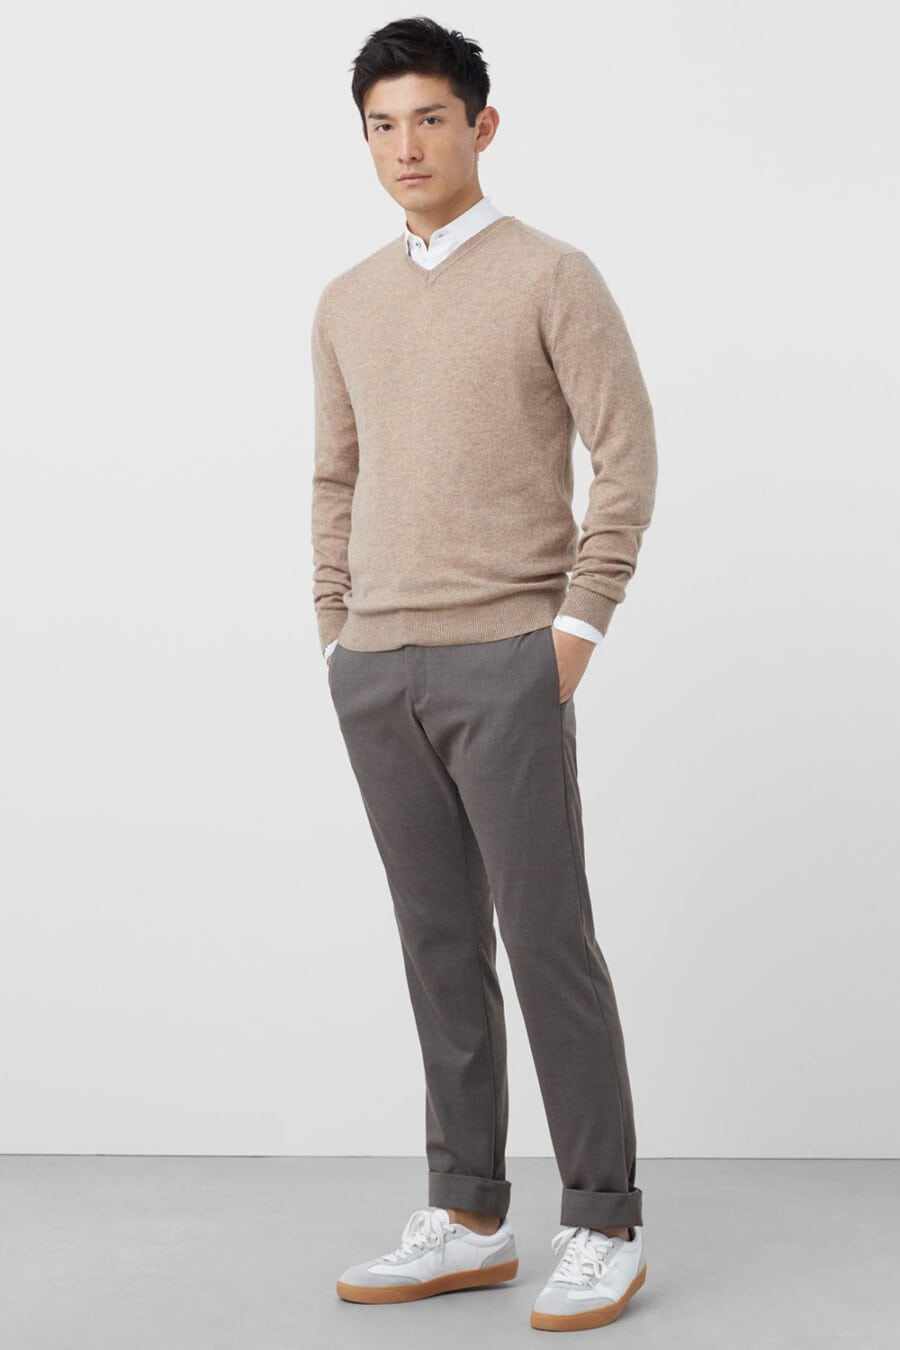 Men's grey chinos, white shirt, beige merino V-neck sweater and white sneakers outfit with no socks